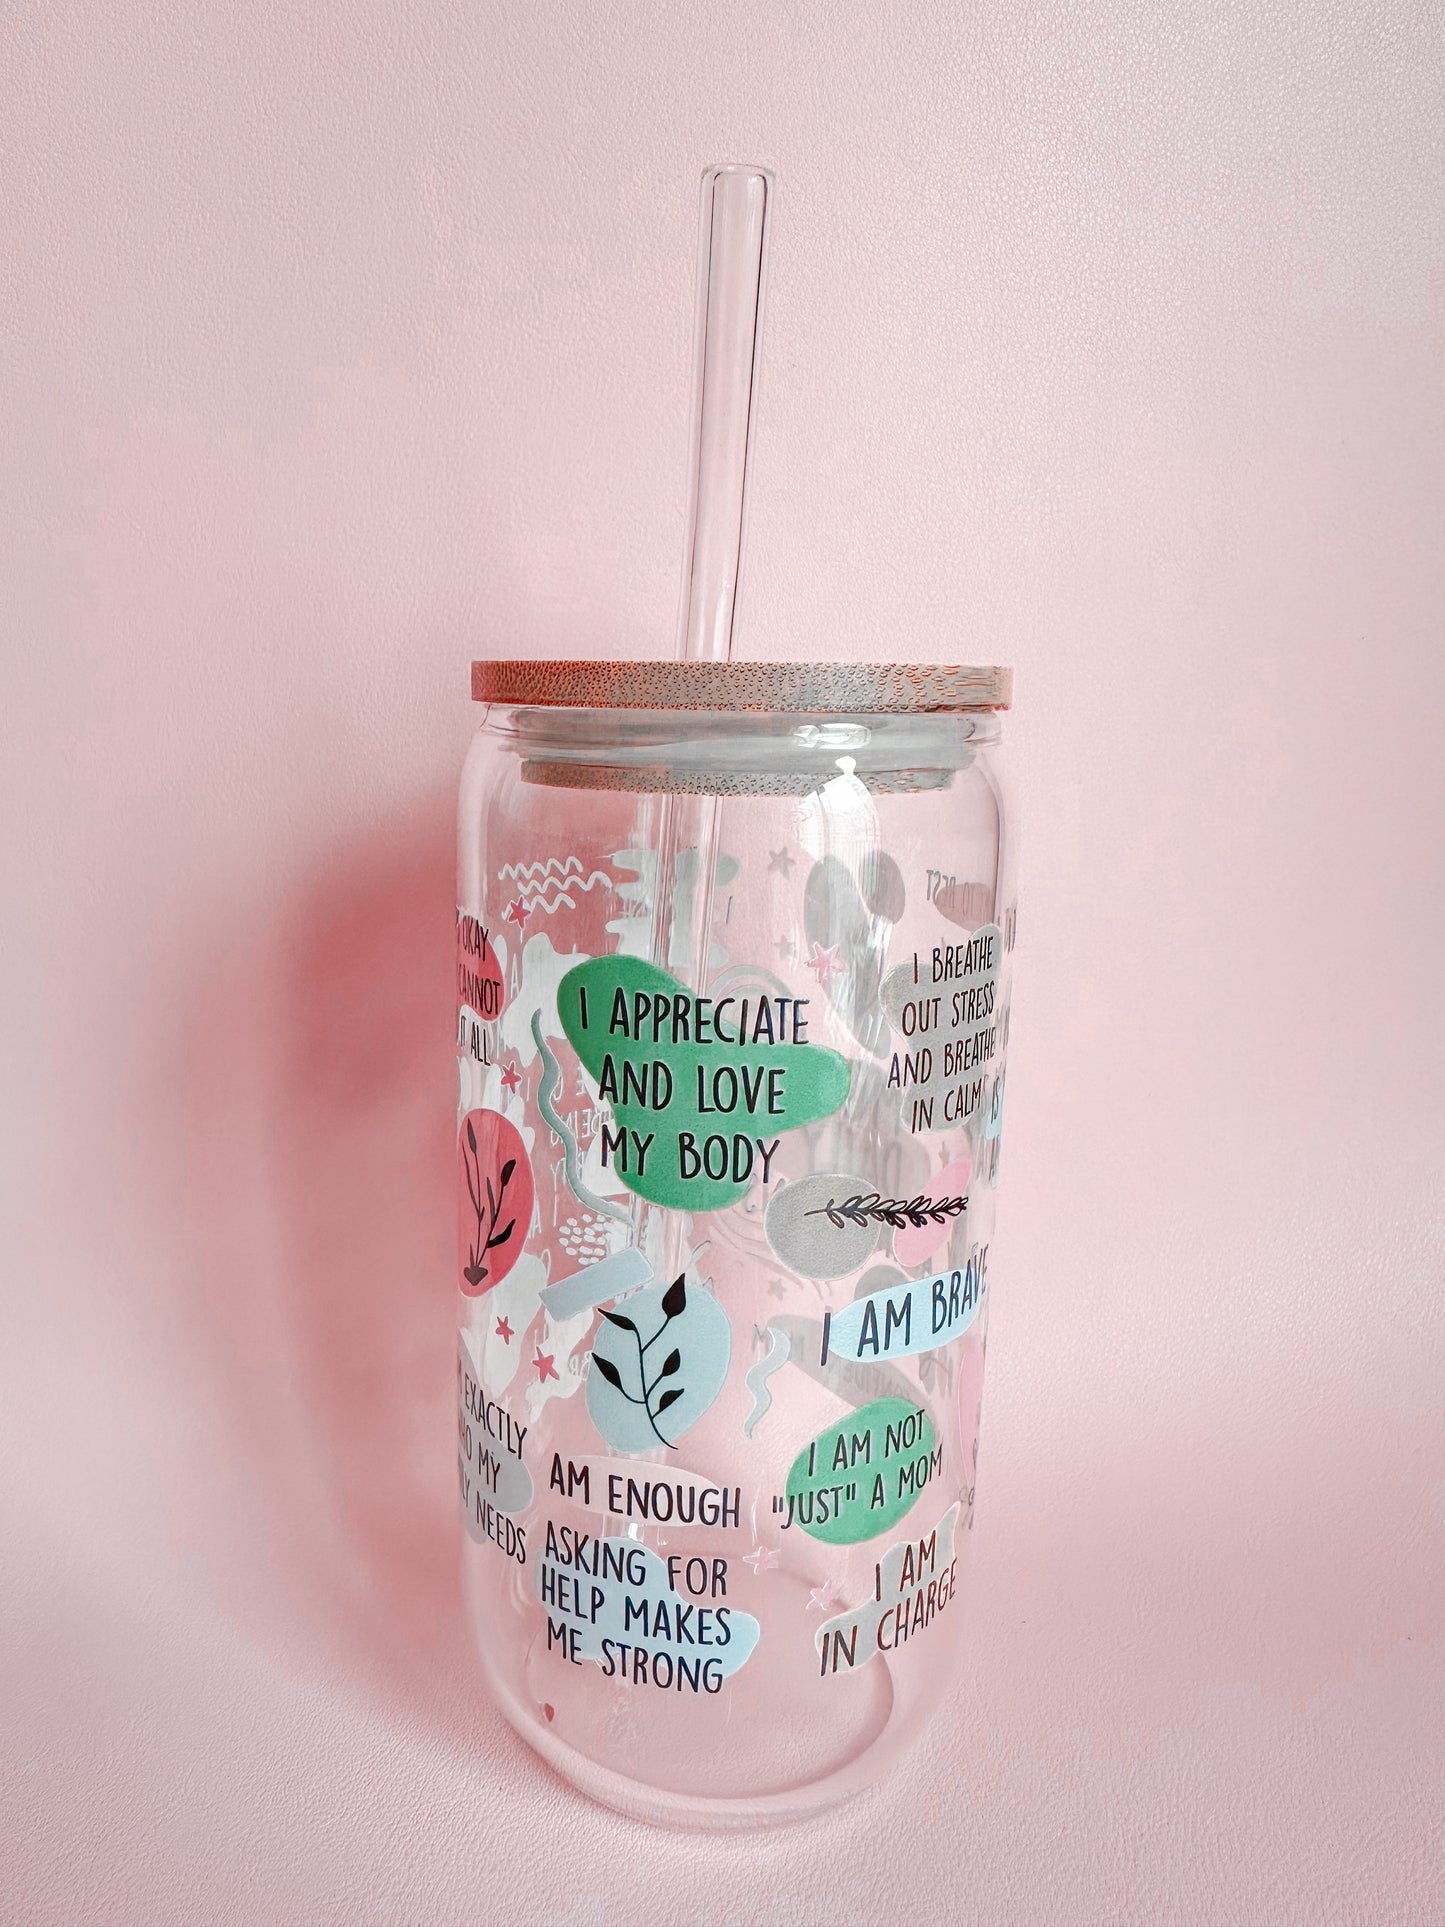 Mom Daily Affirmations Cup